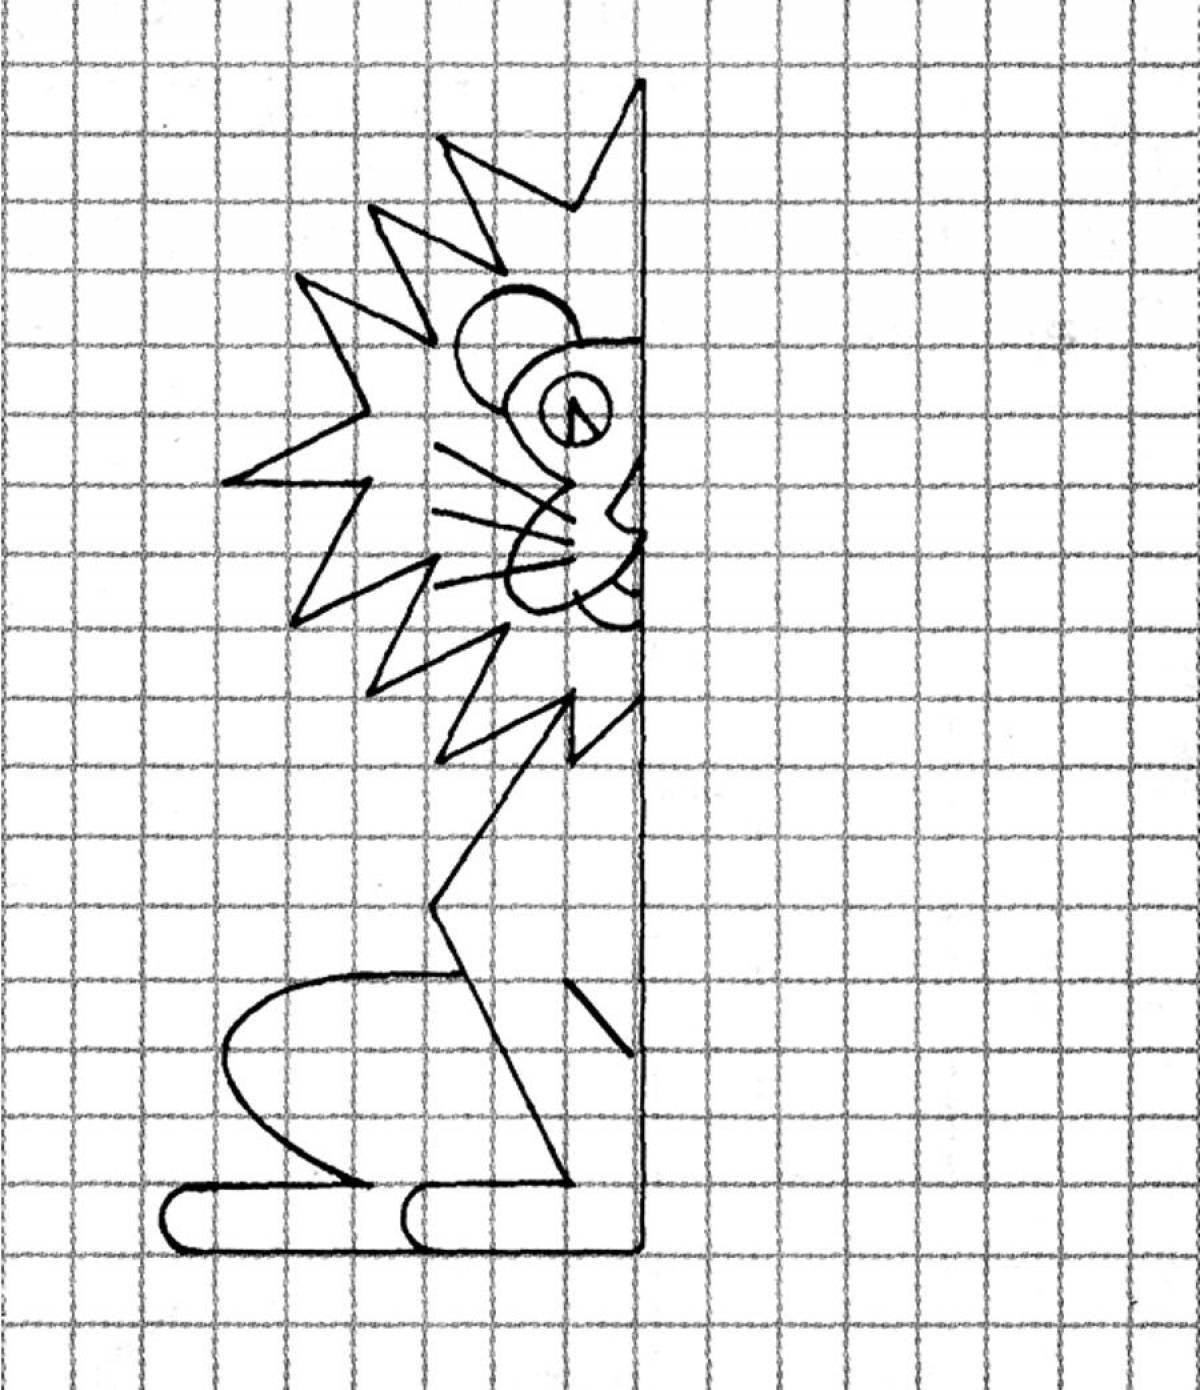 Draw a lion in the cells